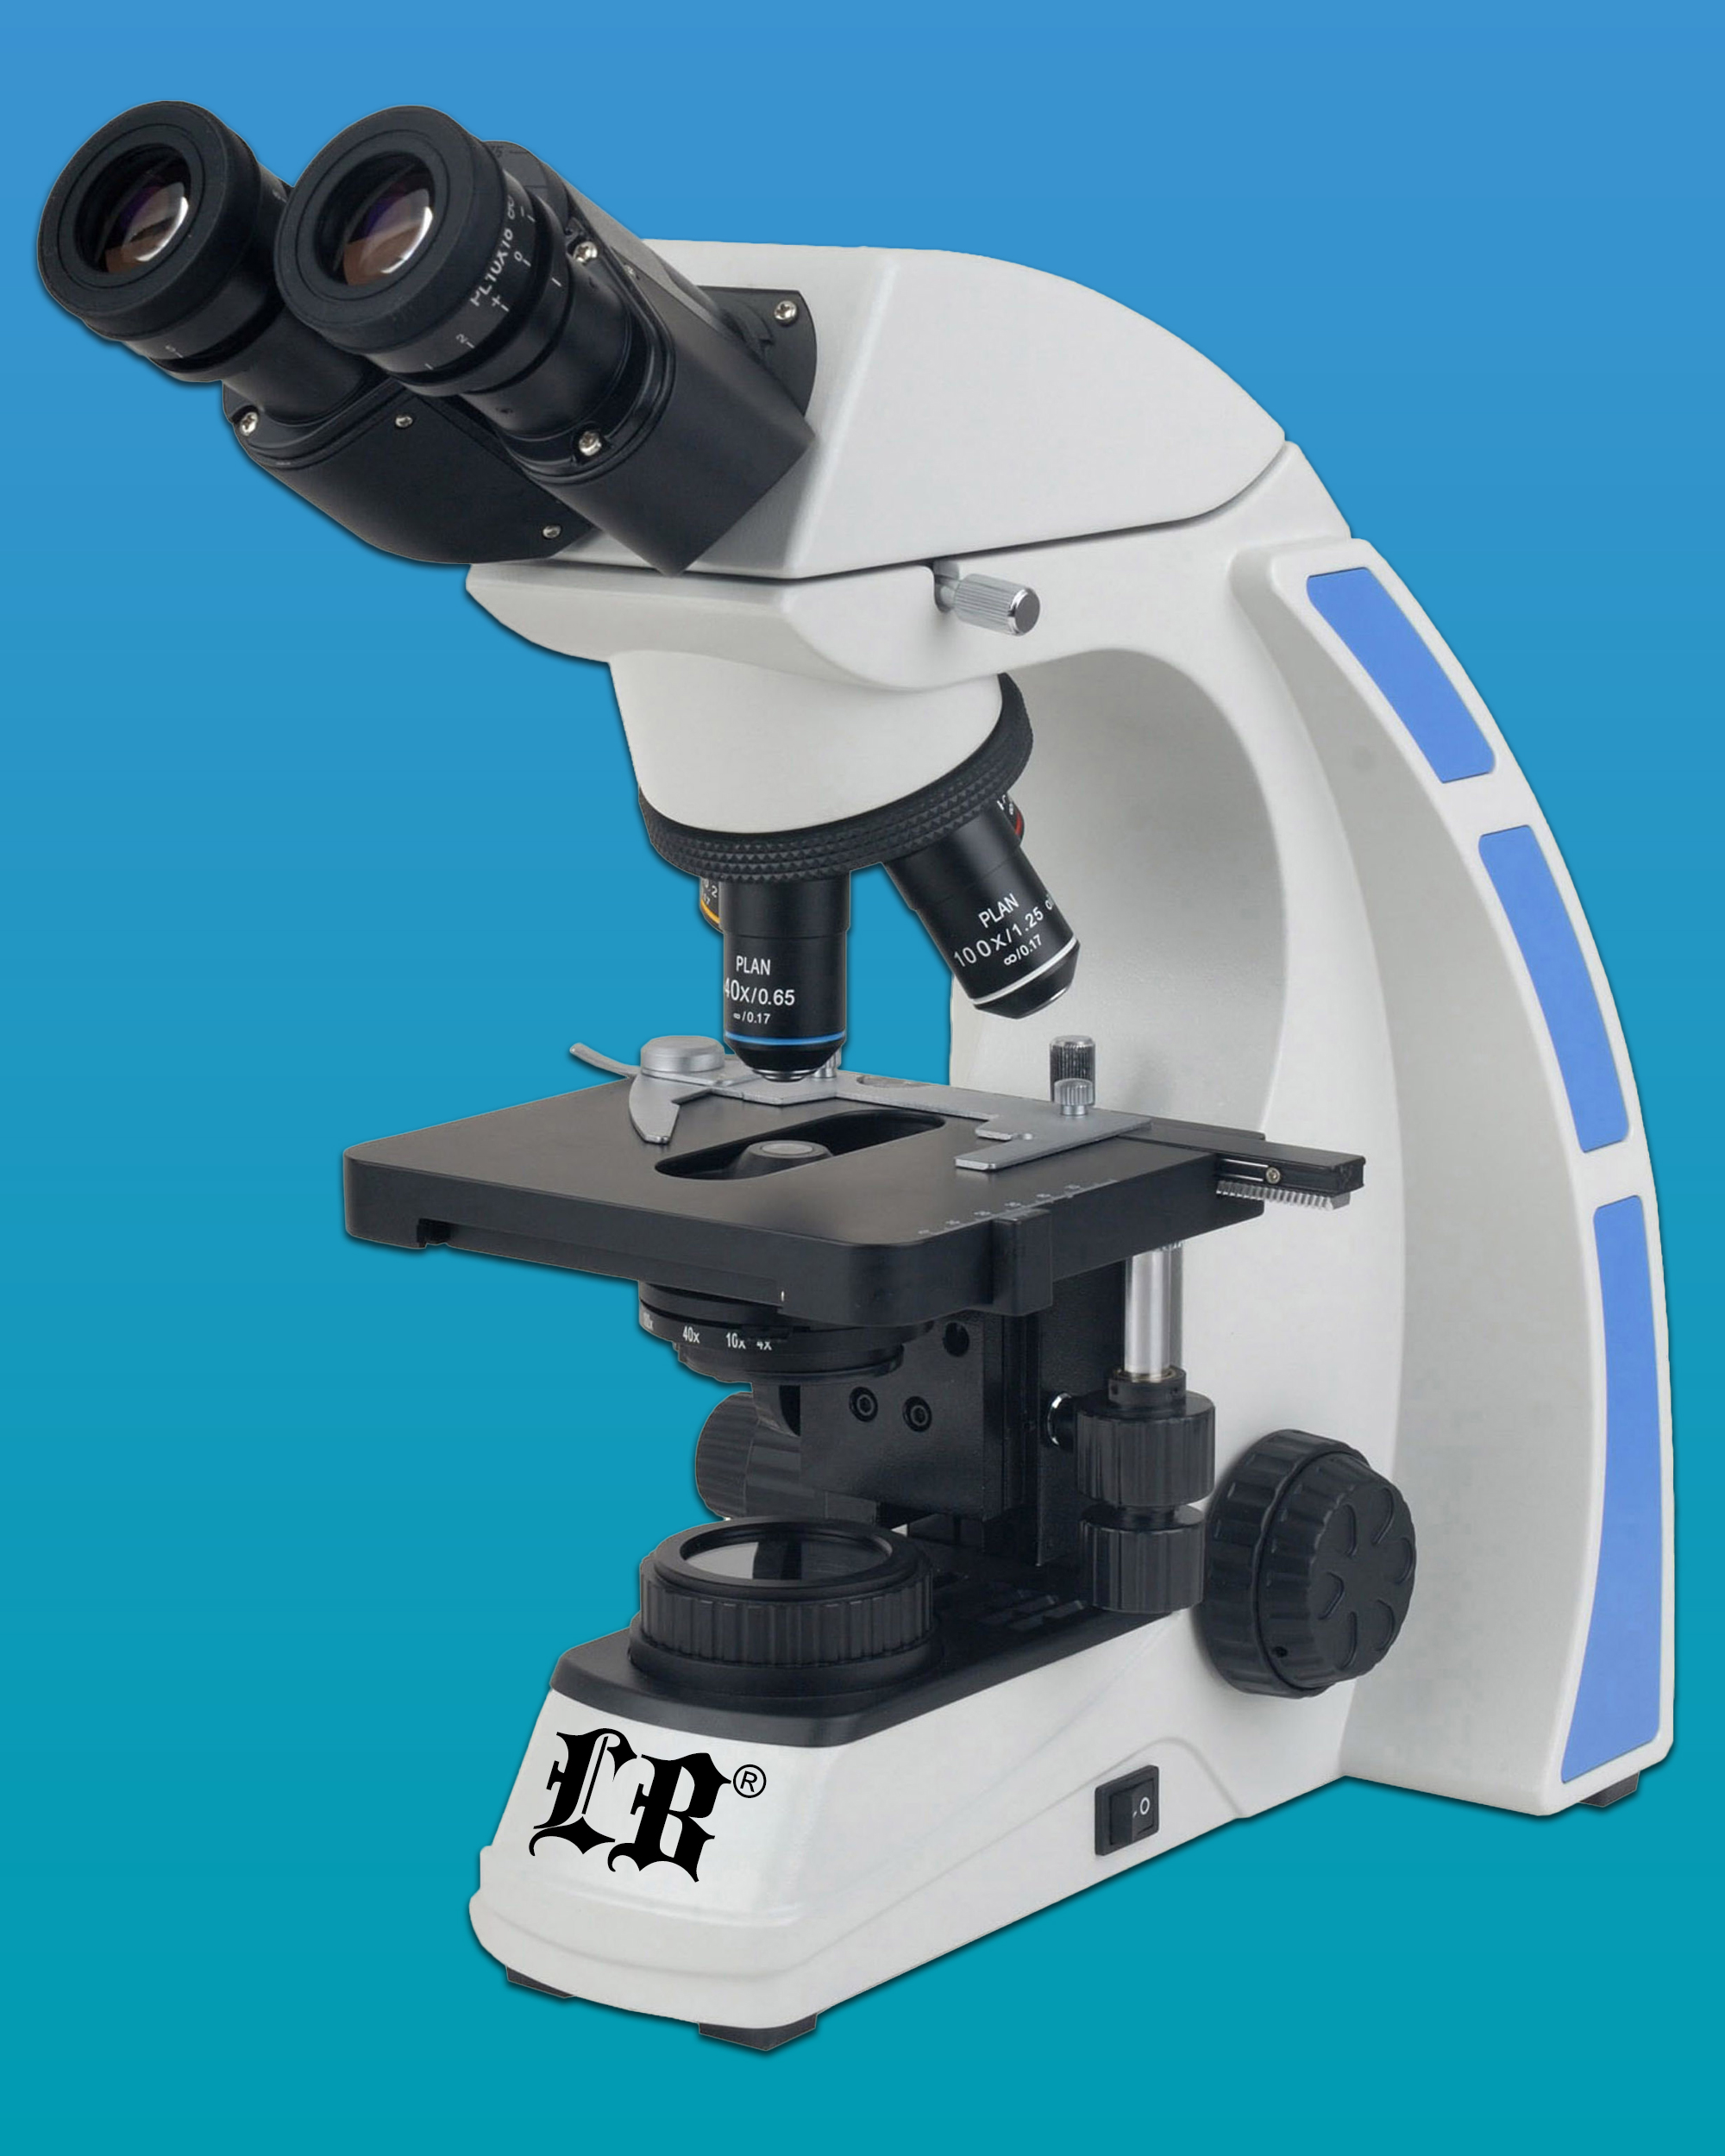 LB-246 Biological Binocular Microscope with Infinite Optical System and Infinite Plan Achromatic Objectives 4×, 10×, 40×, 100×